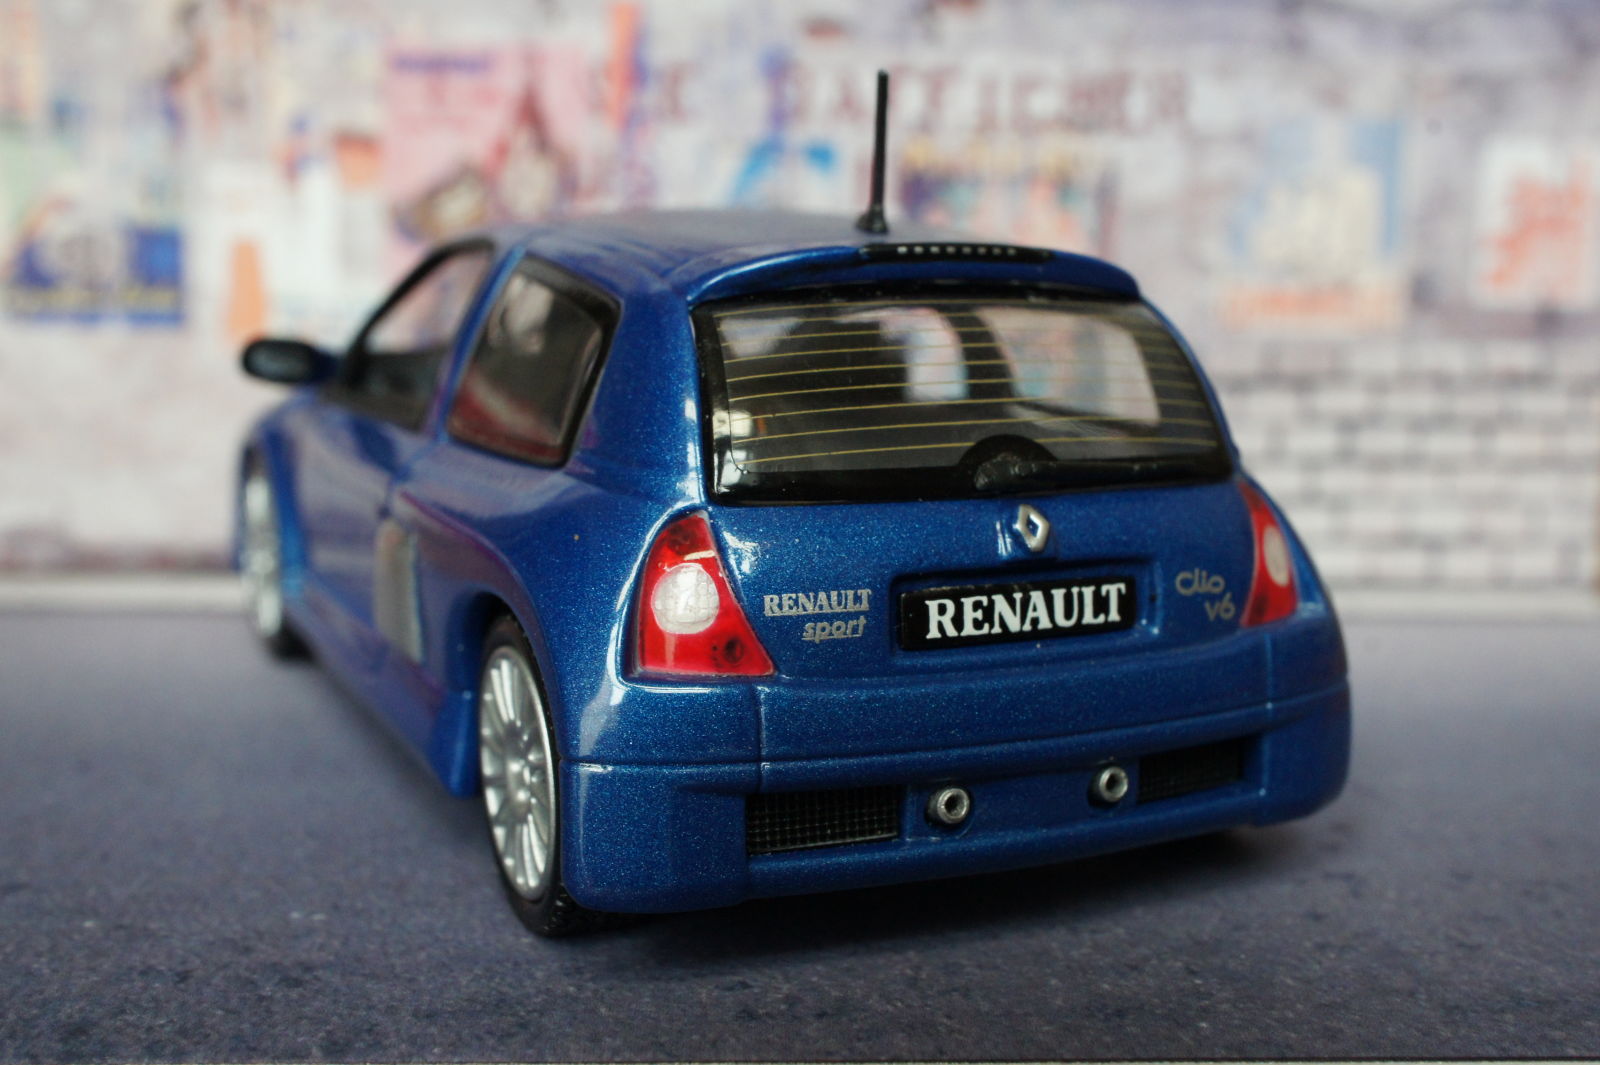 Illustration for article titled French Friday: Clio V6 part deux